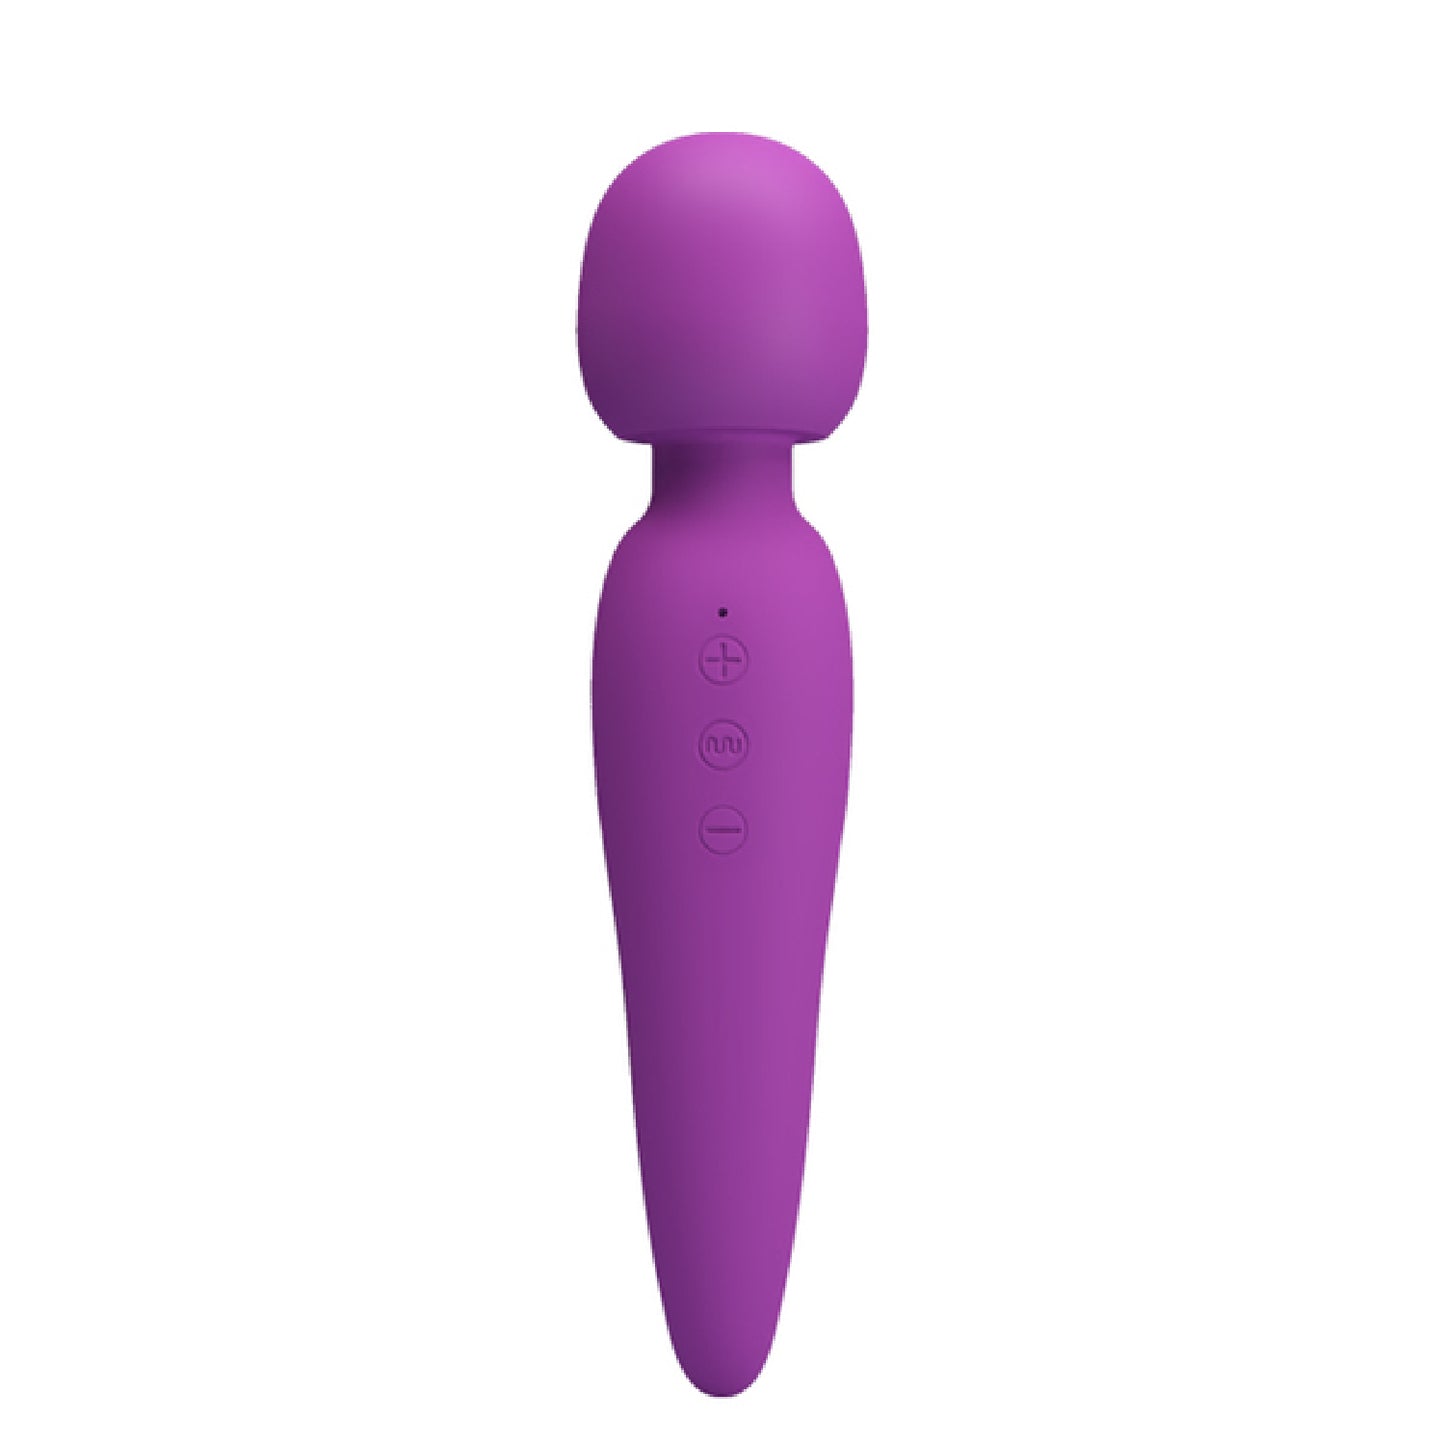 Pretty Love Meredith 7 Function Rechargeable Wand  - Club X